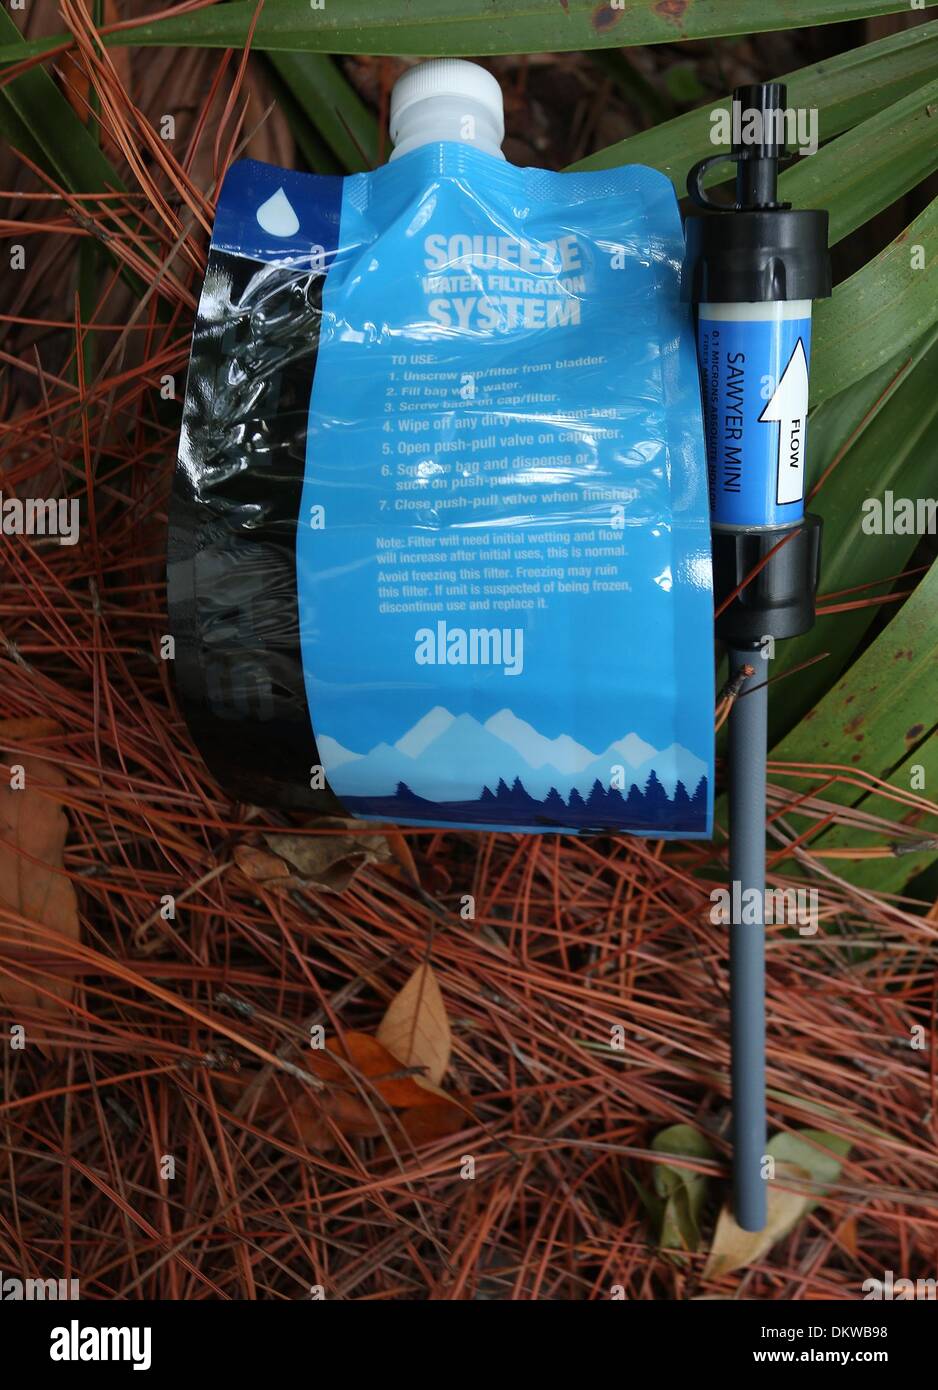 Pinellas Park, Florida, USA. 5th Dec, 2013. SCOTT KEELER | Times. The Sawyer Mini Water Filtration System uses hollow fiber membrane filters that can last a decade without replacement. © Scott Keeler/Tampa Bay Times/ZUMAPRESS.com/Alamy Live News Stock Photo